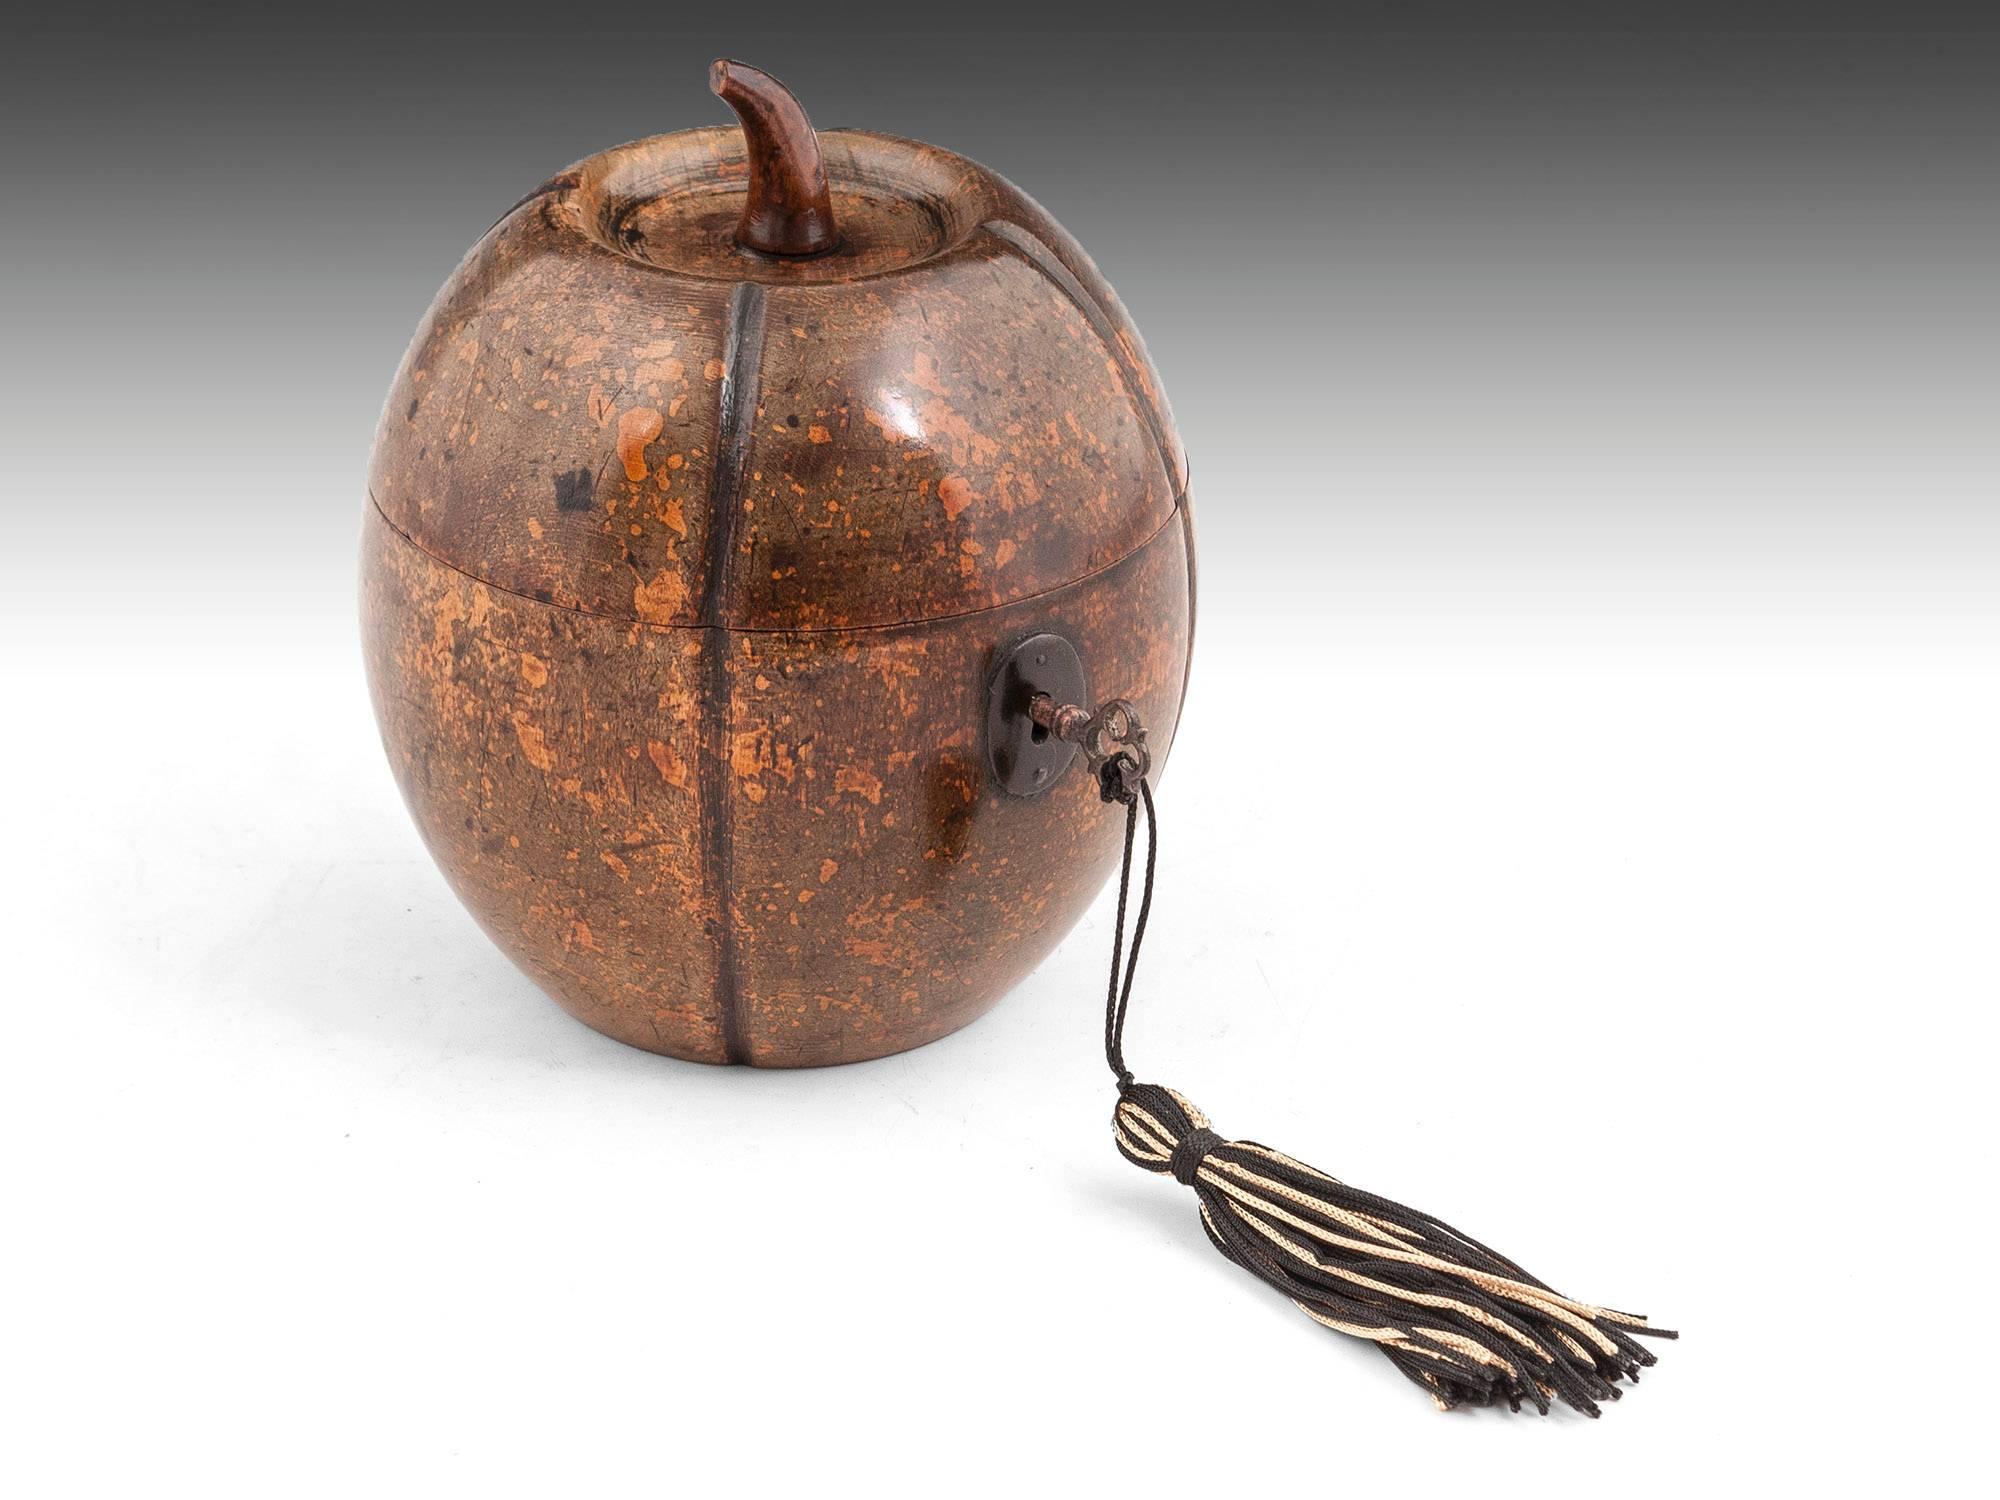 Antique Melon Fruitwood Tea Caddy In Excellent Condition For Sale In Northampton, United Kingdom